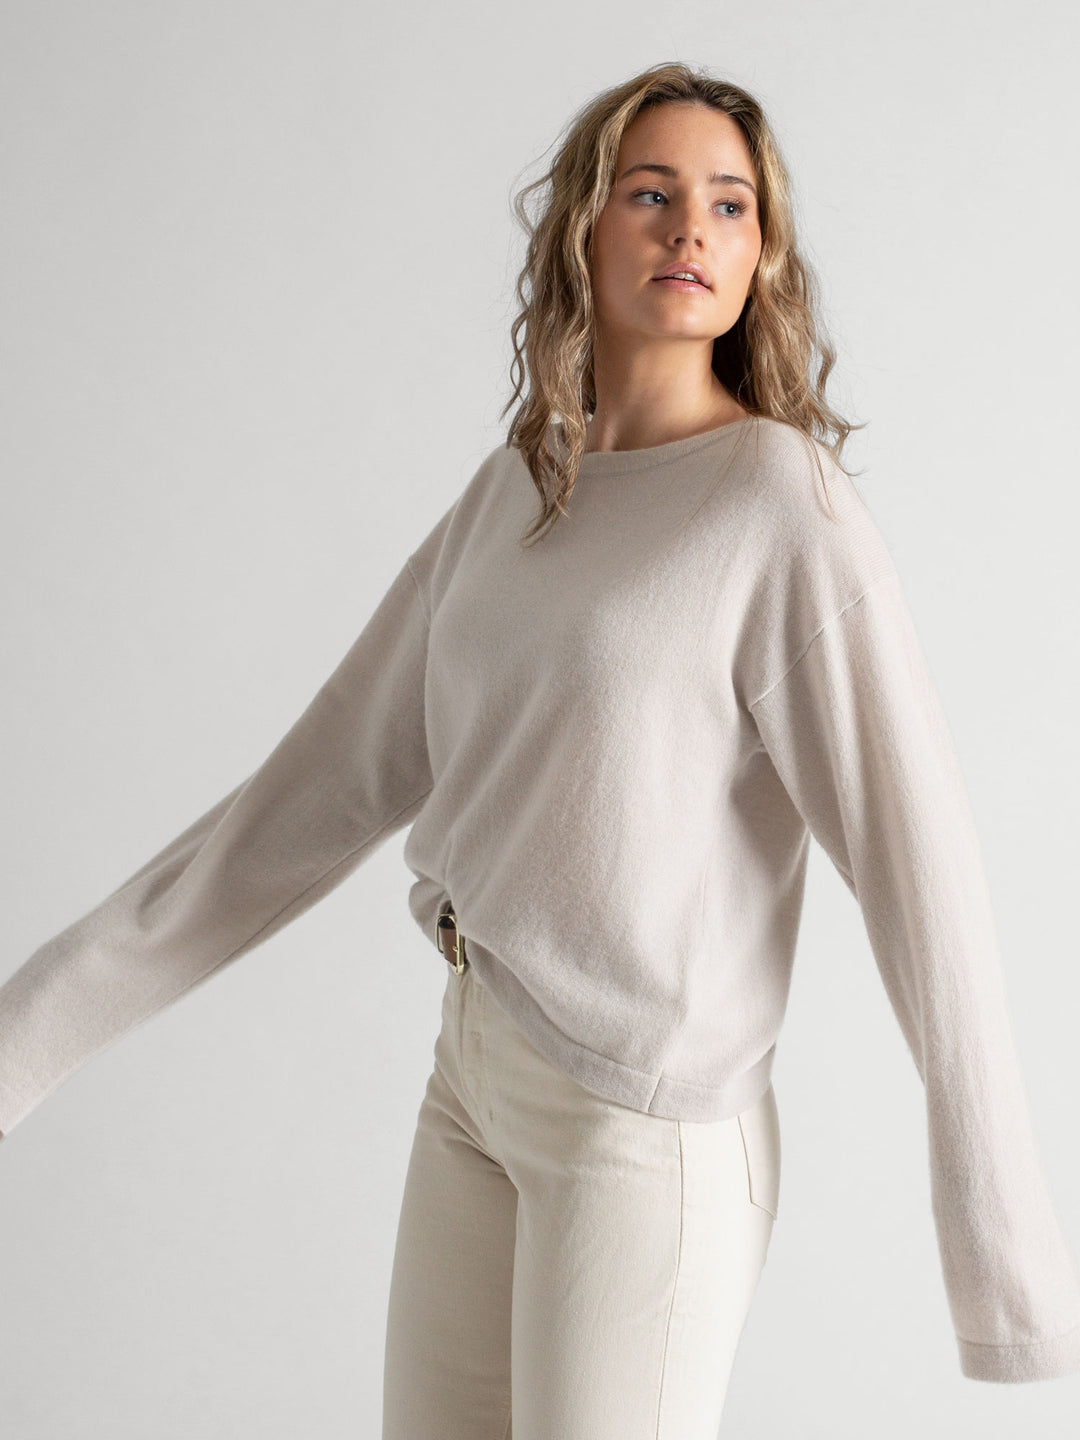 Wide neck cashmere sweater, in 100% pure cashmere. Scandinavian design by Kashmina. Color: Cold Creme.